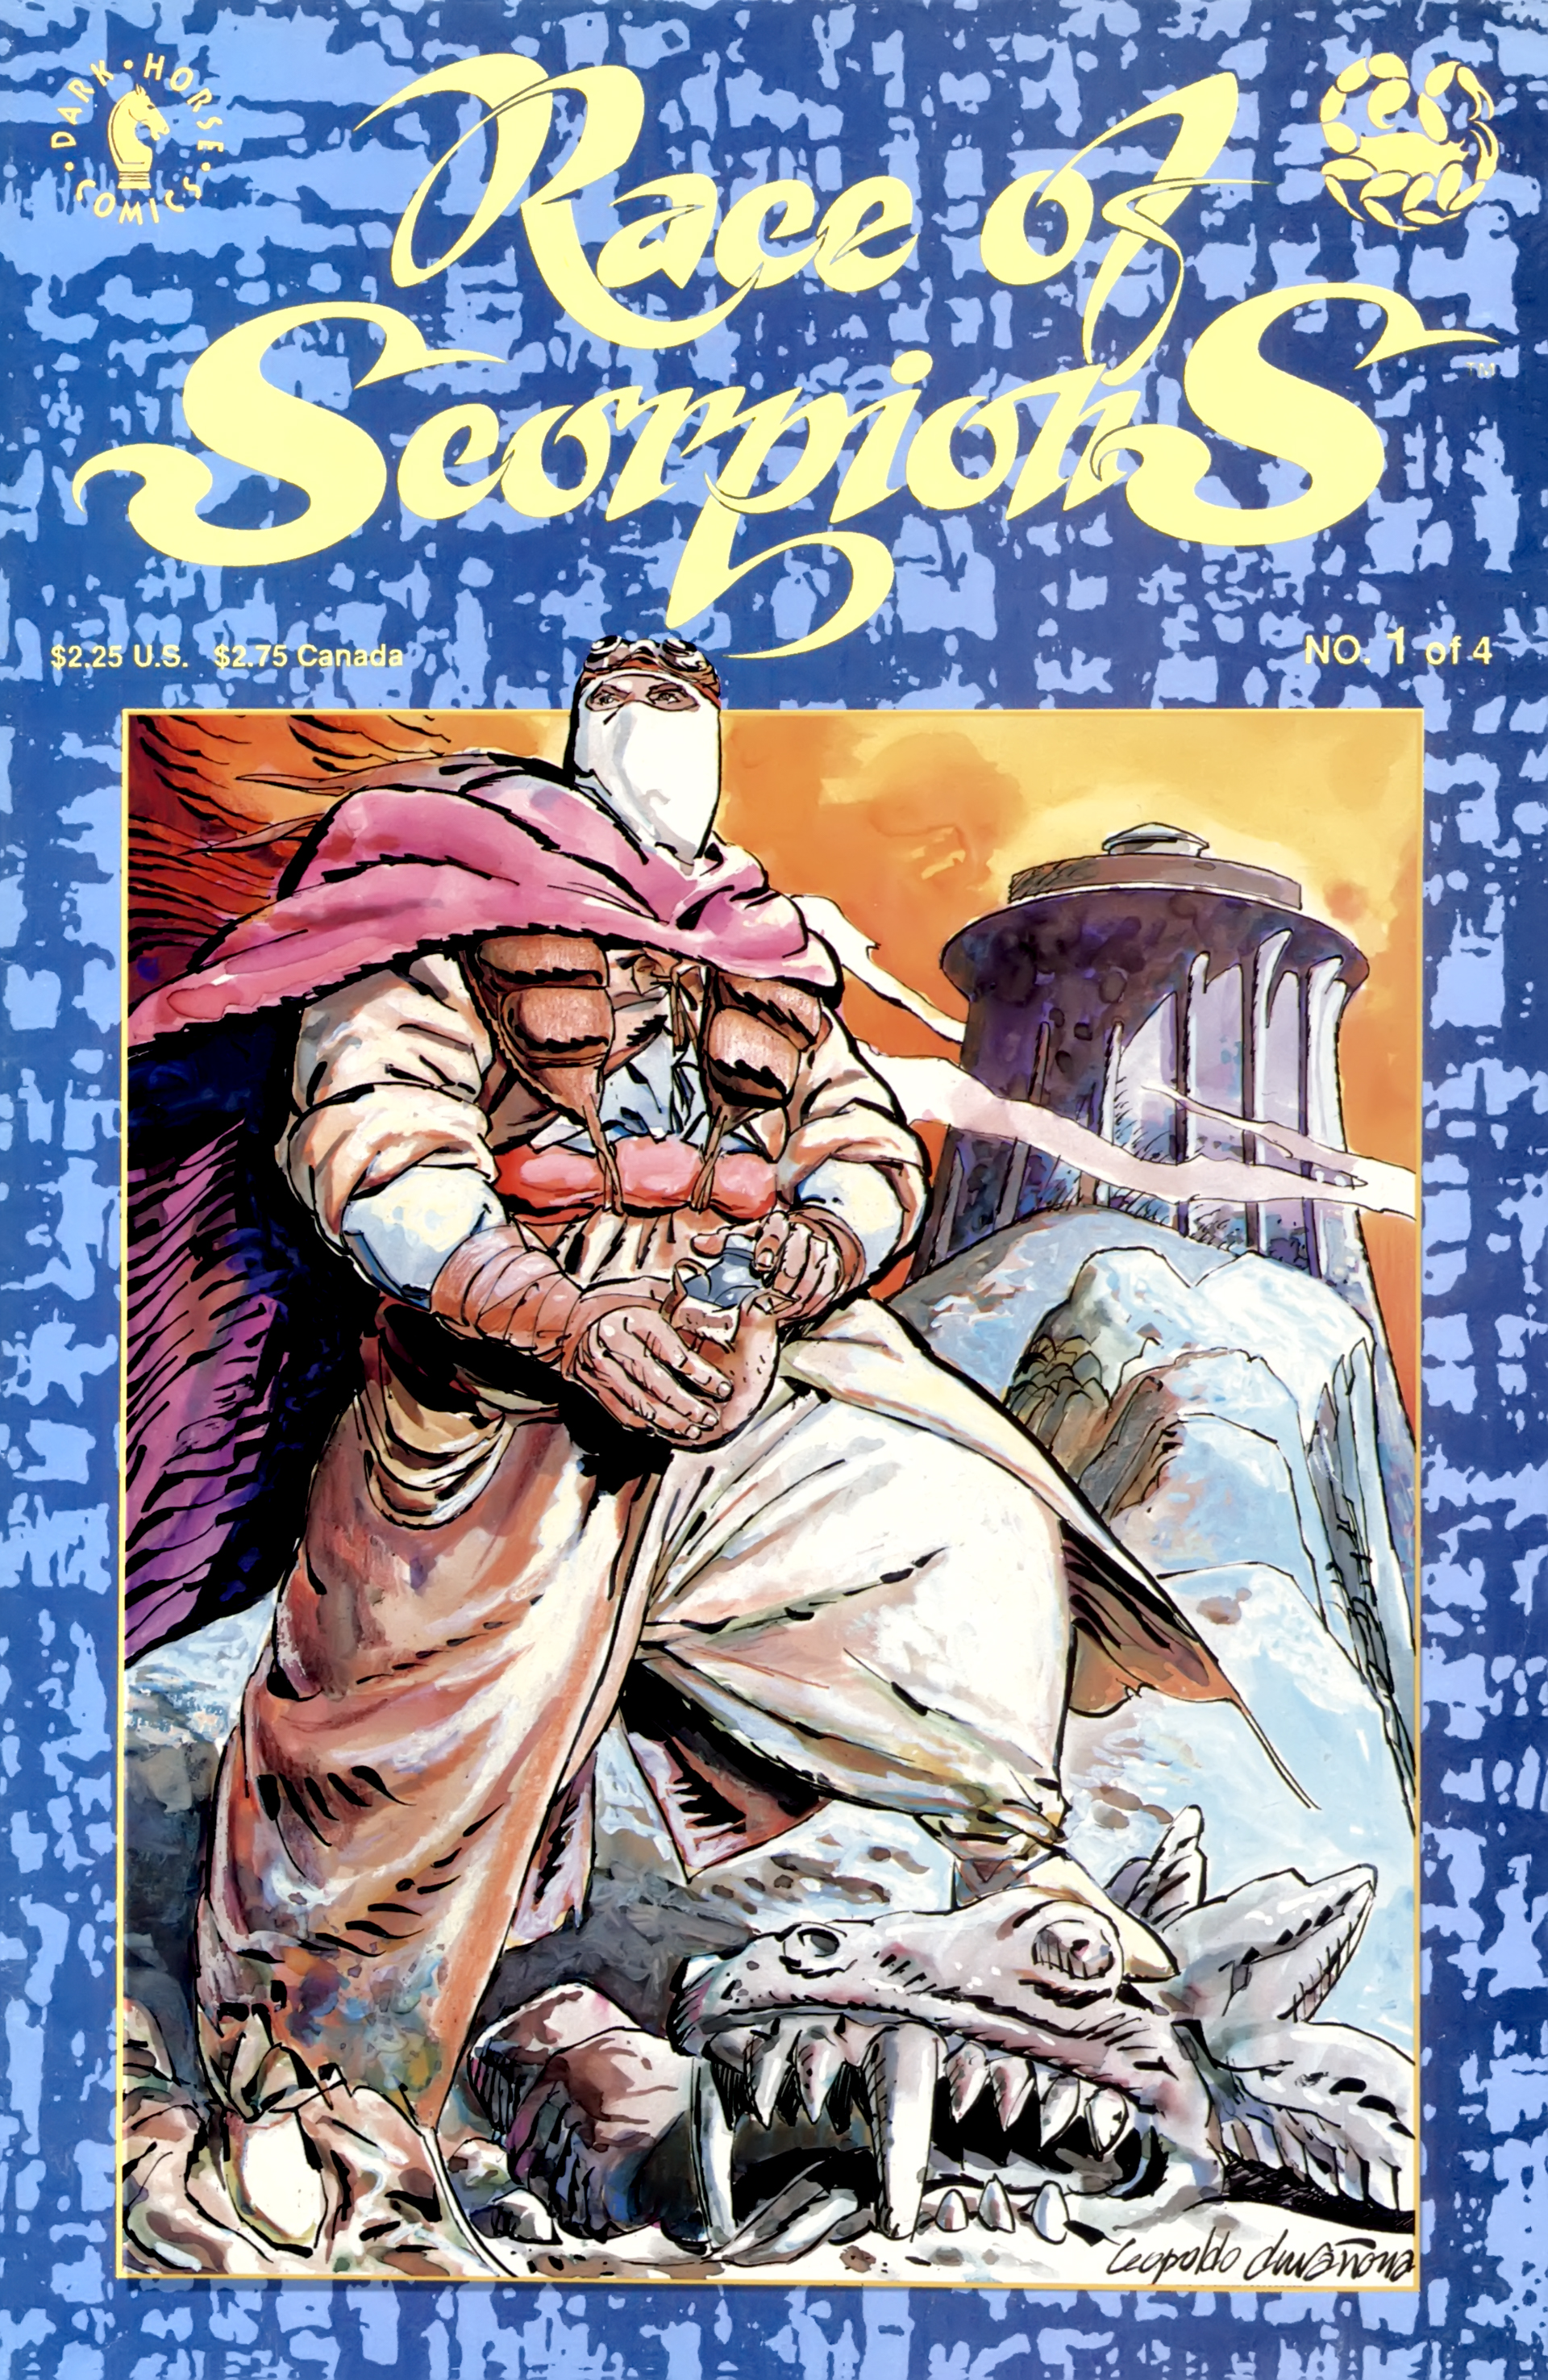 Read online Race Of Scorpions comic -  Issue #1 - 1